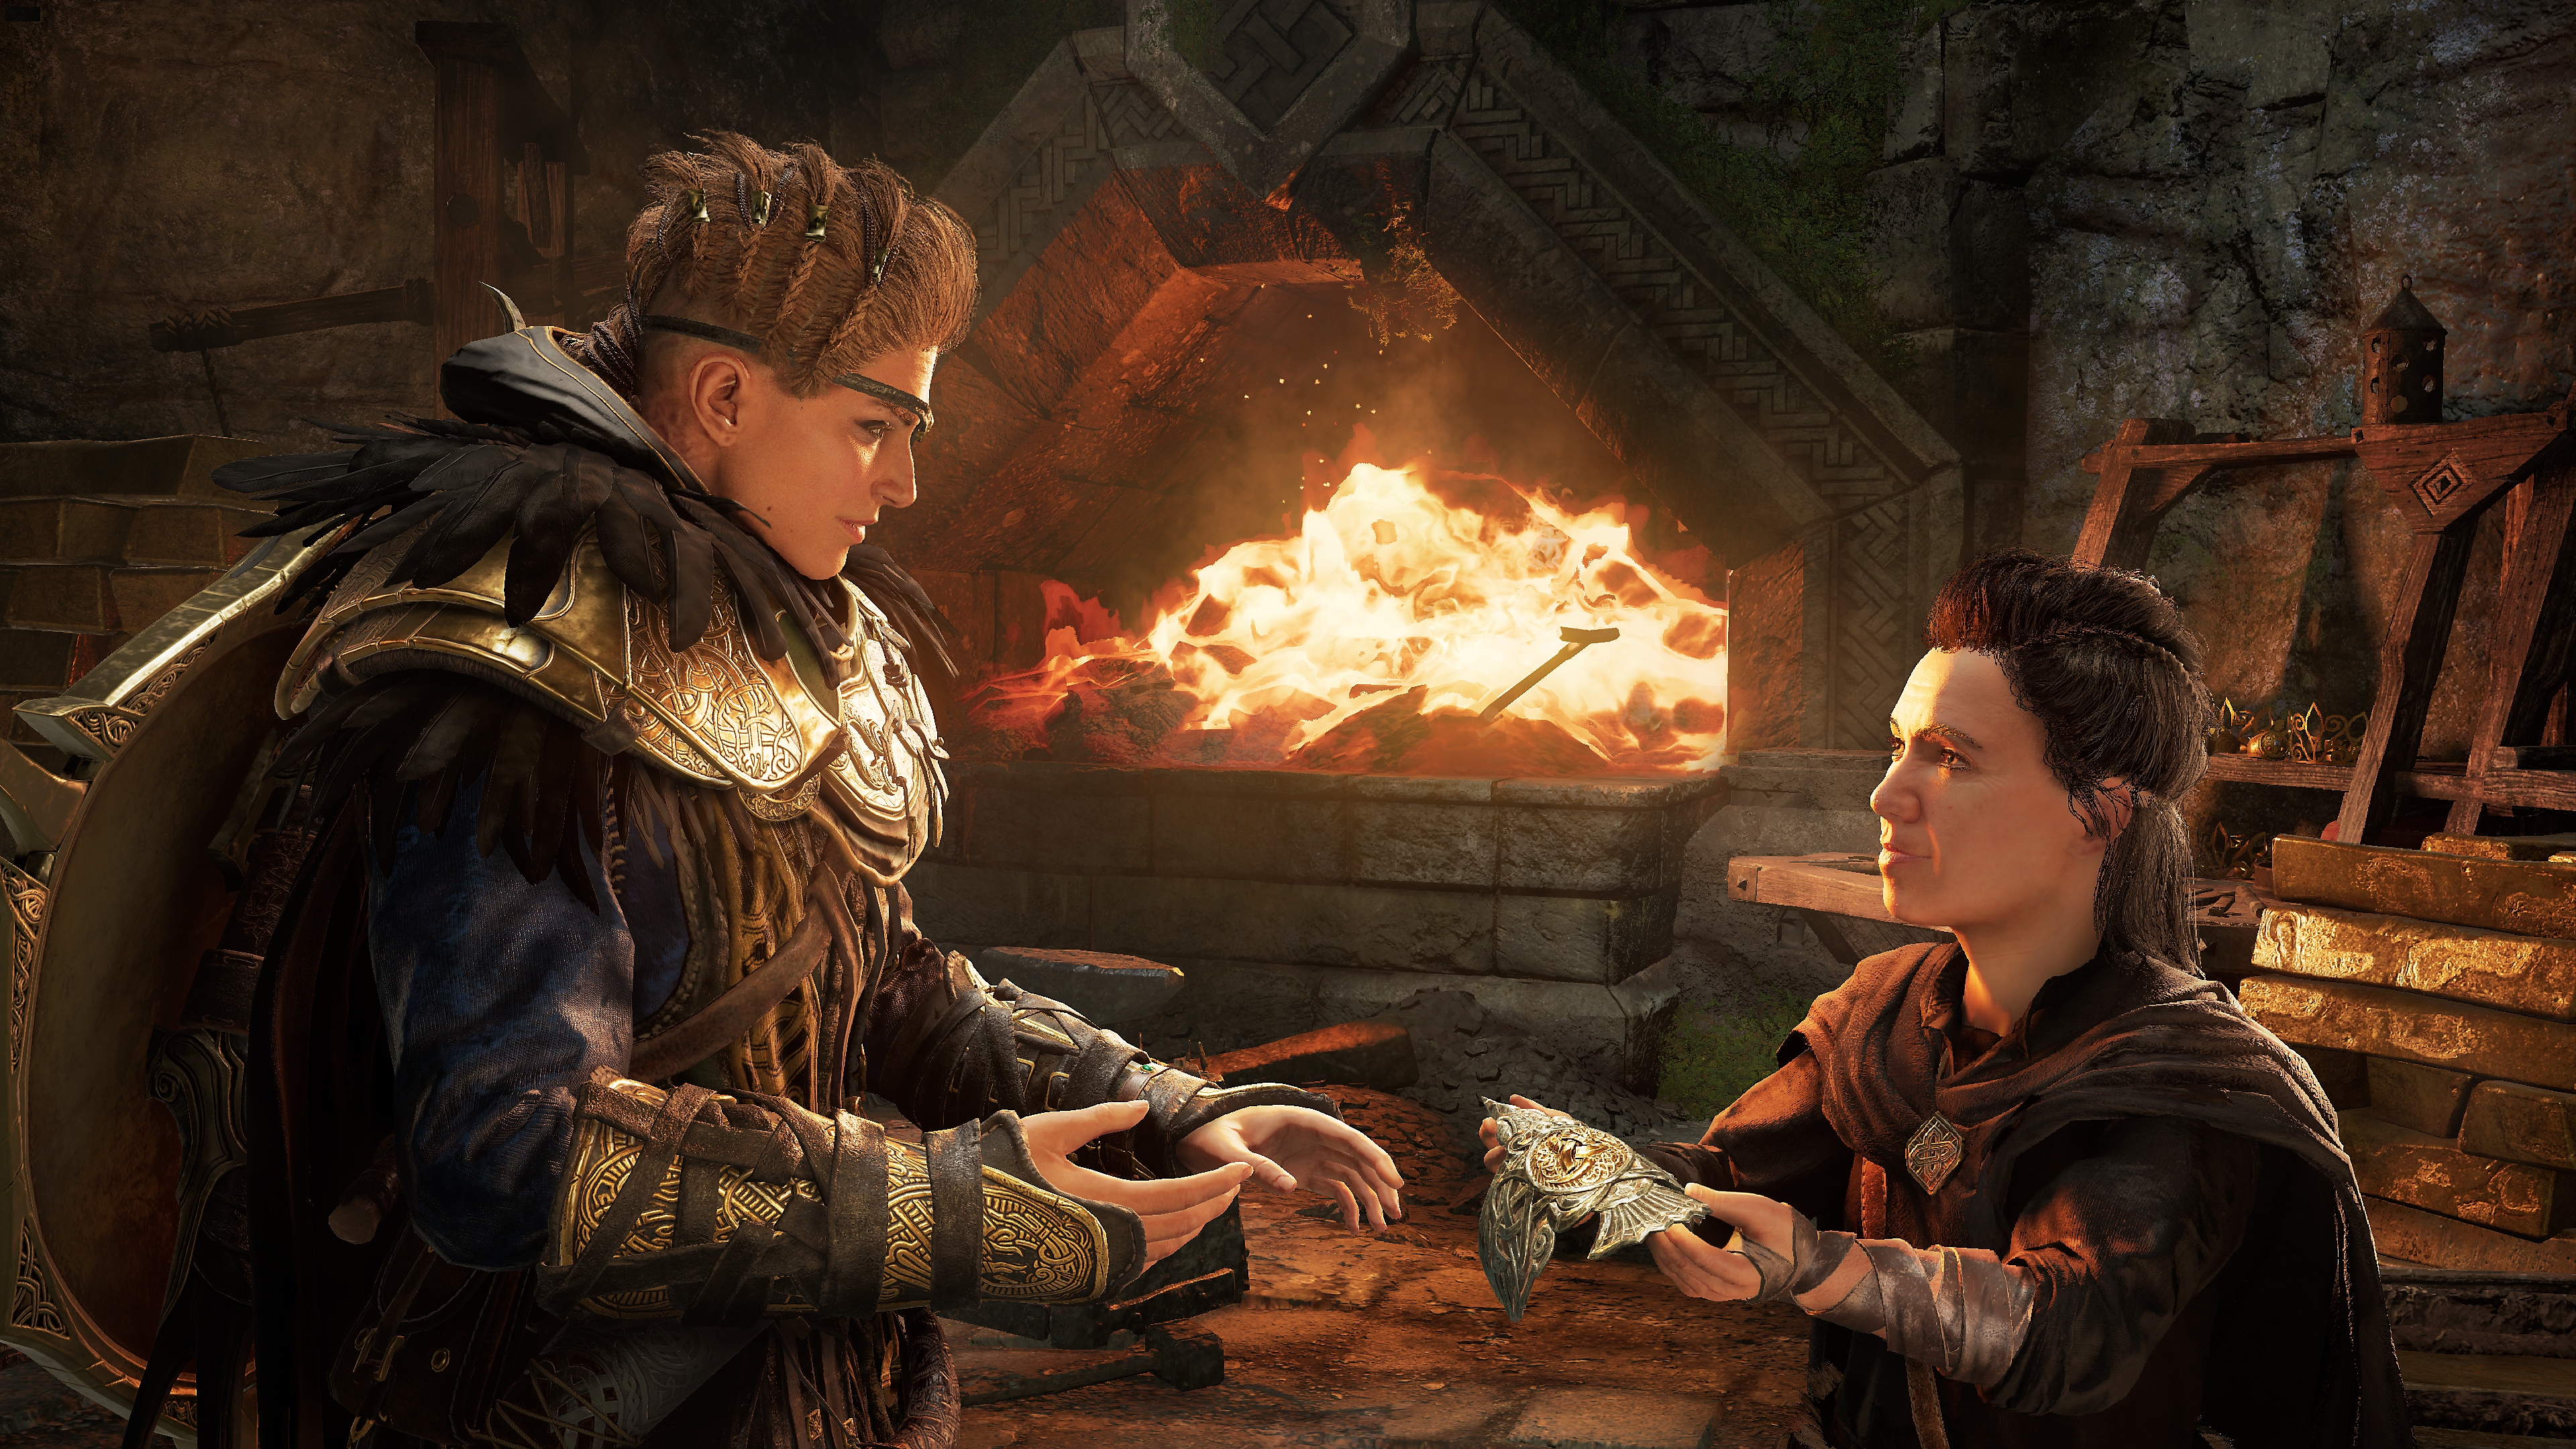 Assassin's Creed Valhalla Dawn of Ragnarok screenshot showing the main character obtaining an item from a dwarven ally